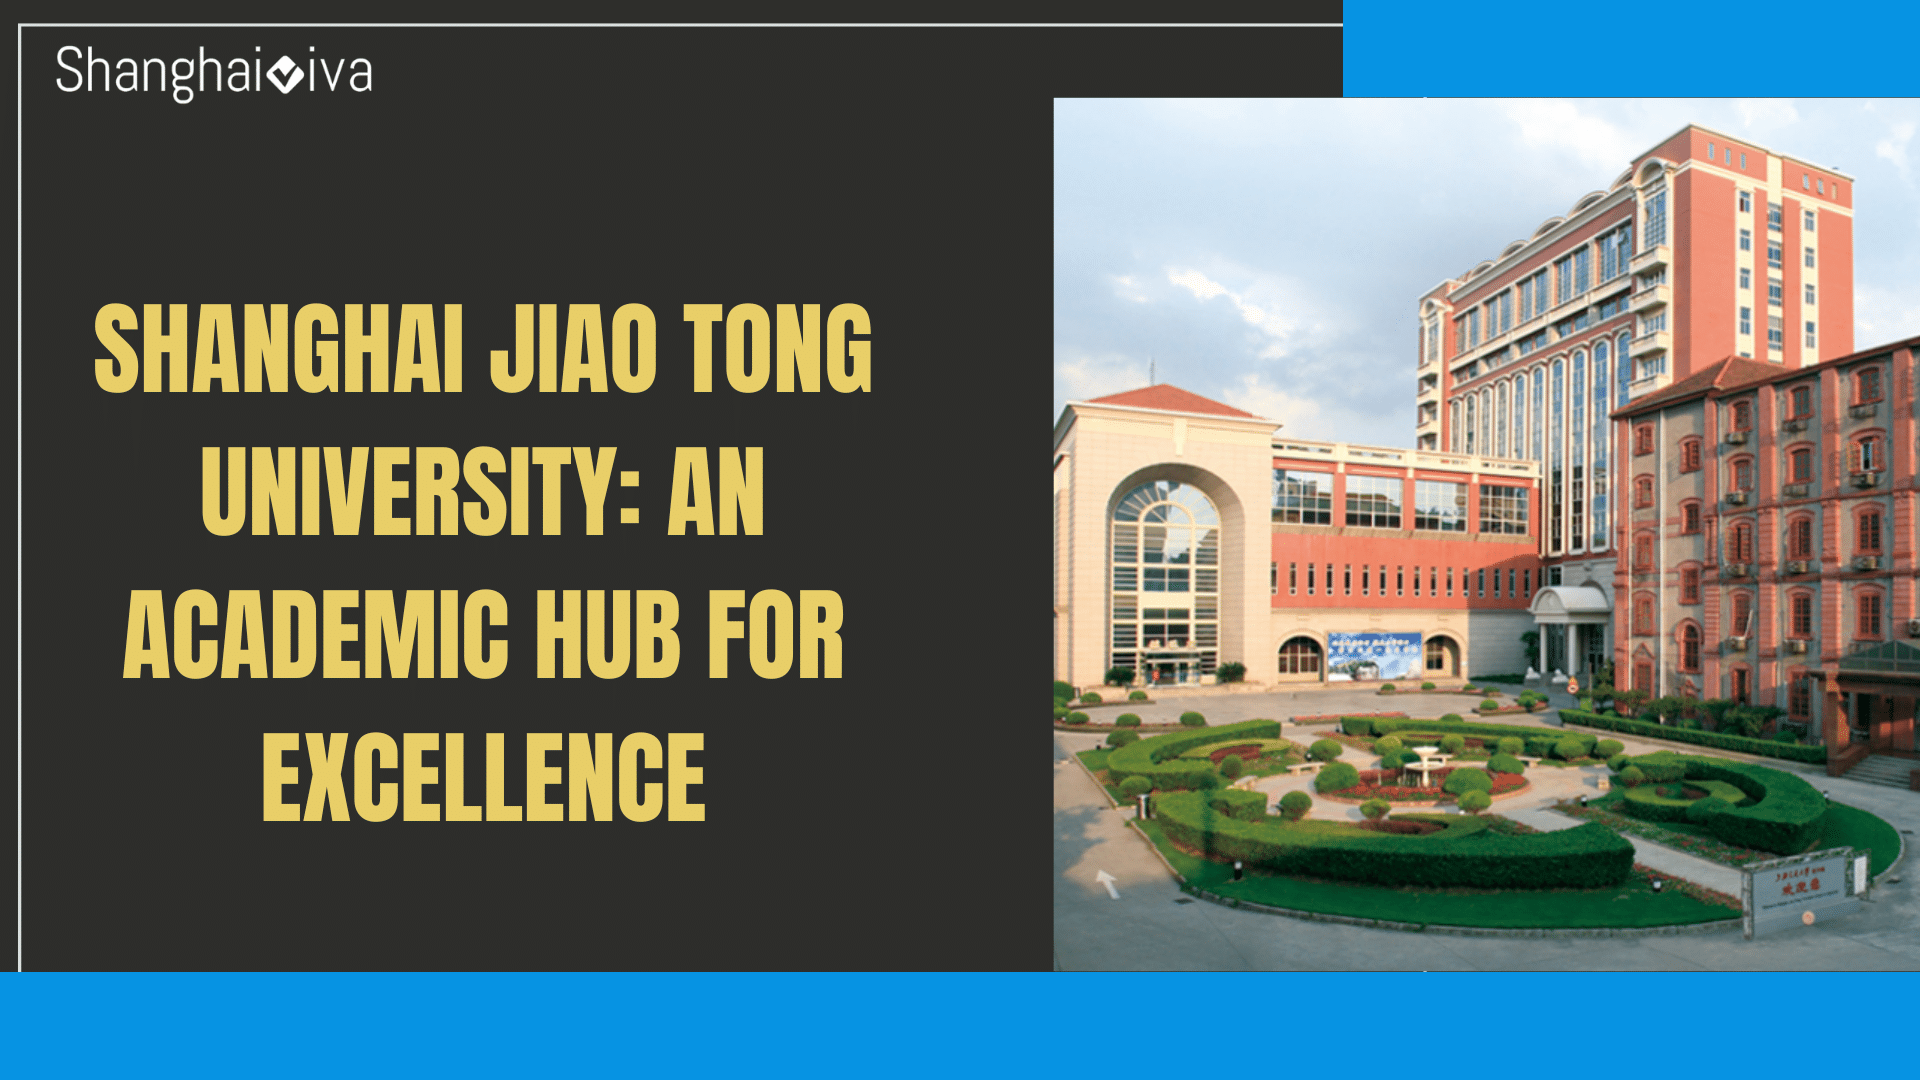 Shanghai Jiao Tong University: An Academic Hub for Excellence